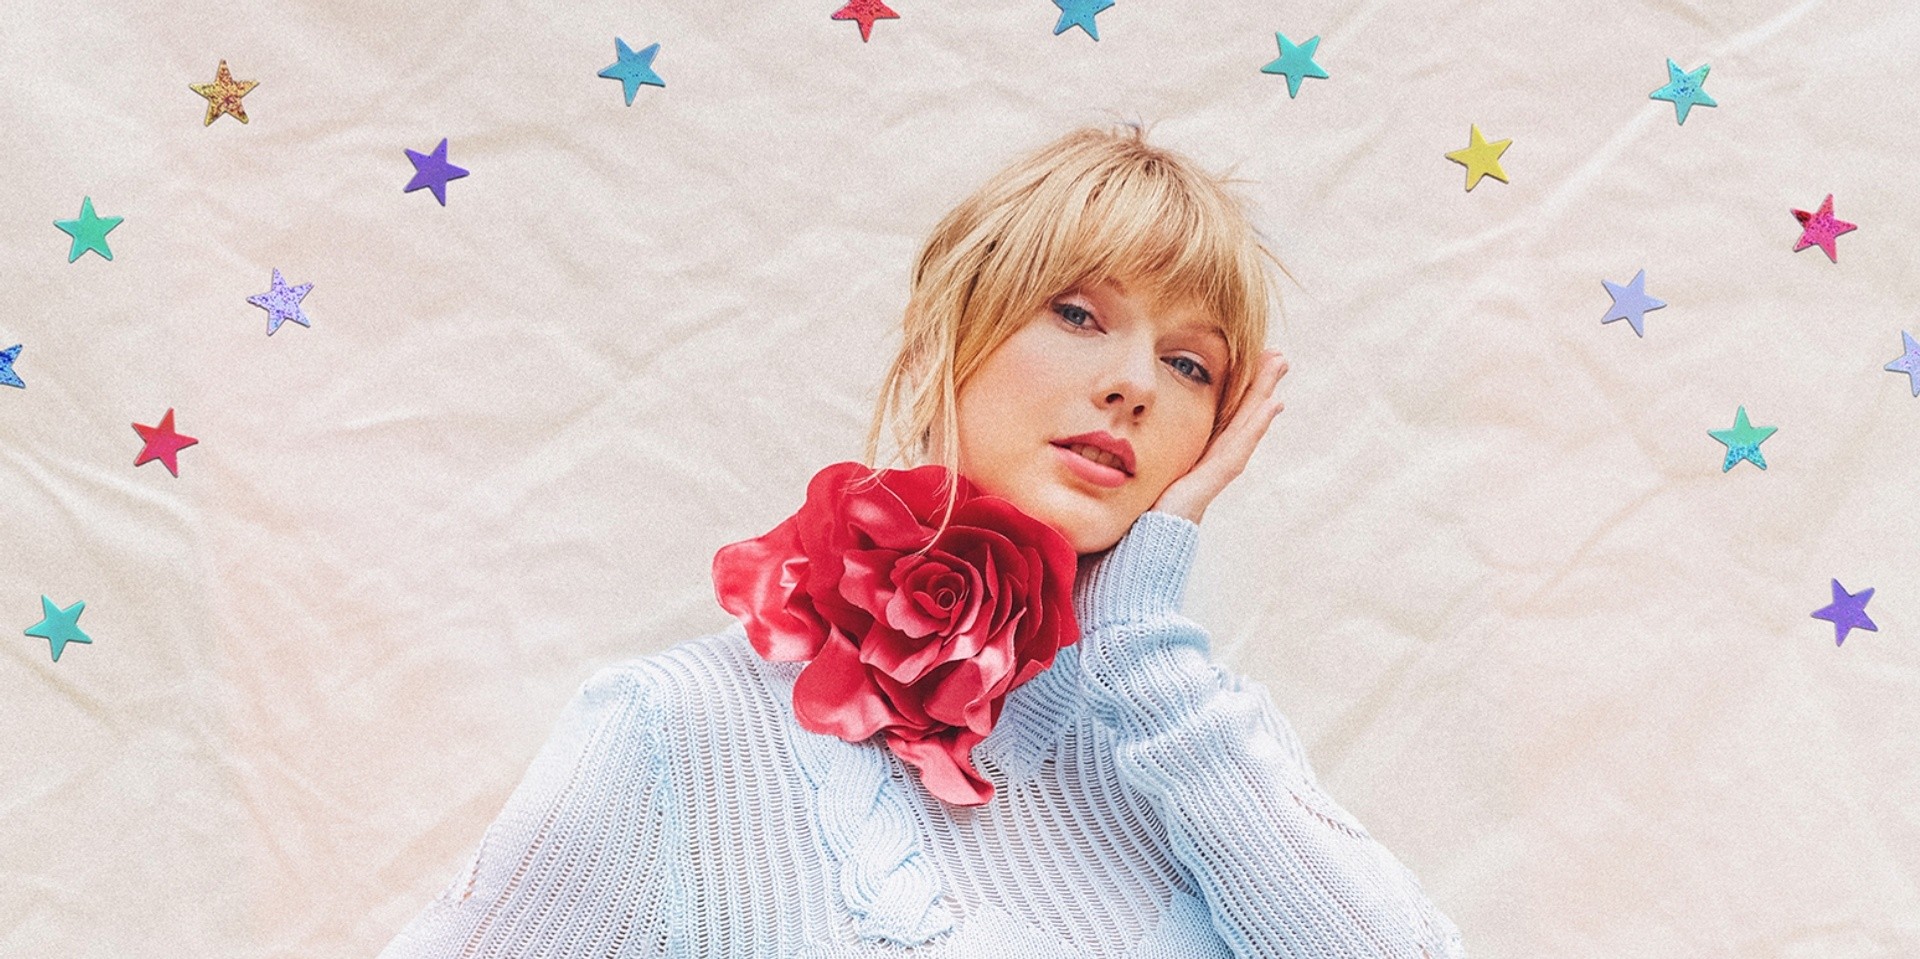 Taylor Swift shares tracklist for Lover